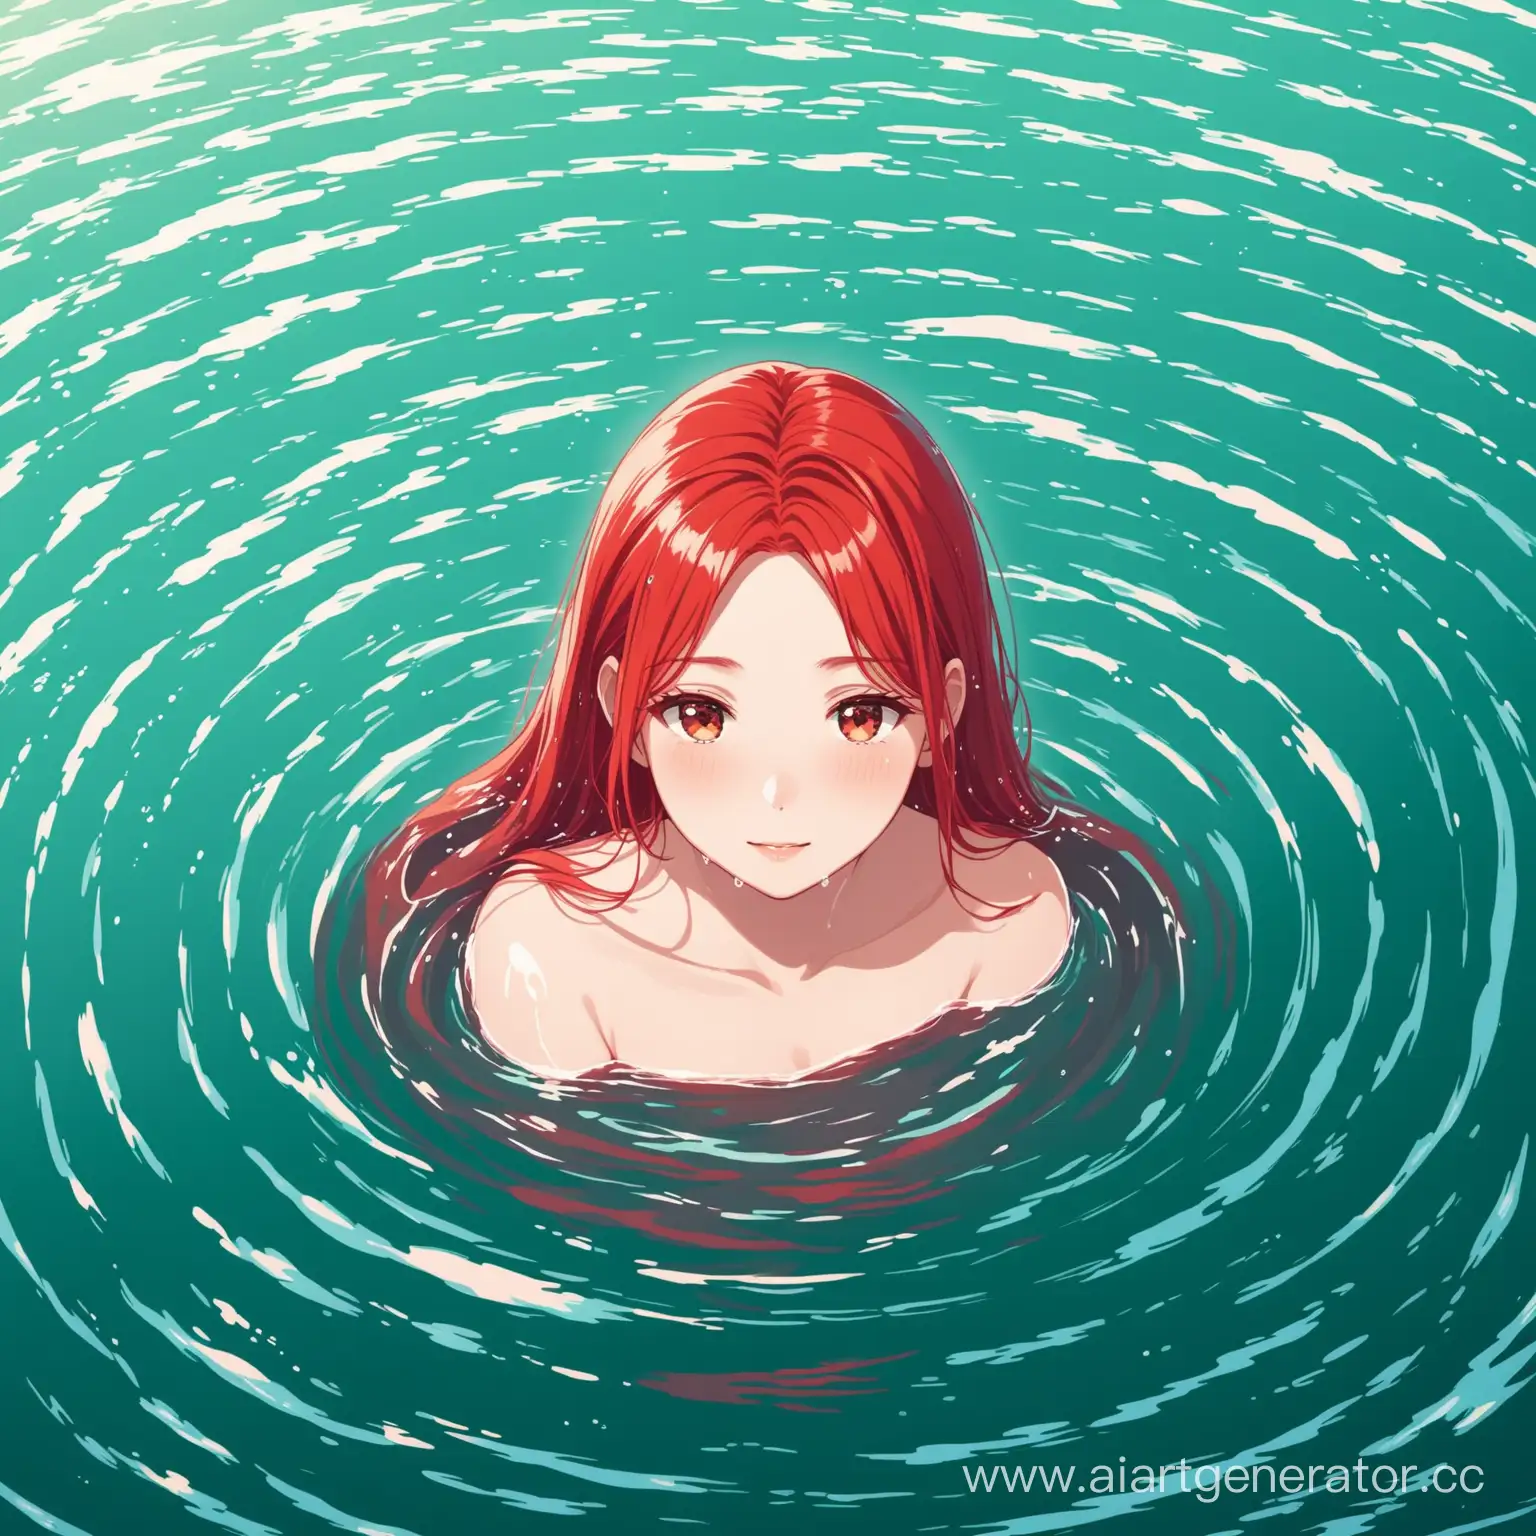 RedHaired-Girl-Submerged-in-Rippling-Waters